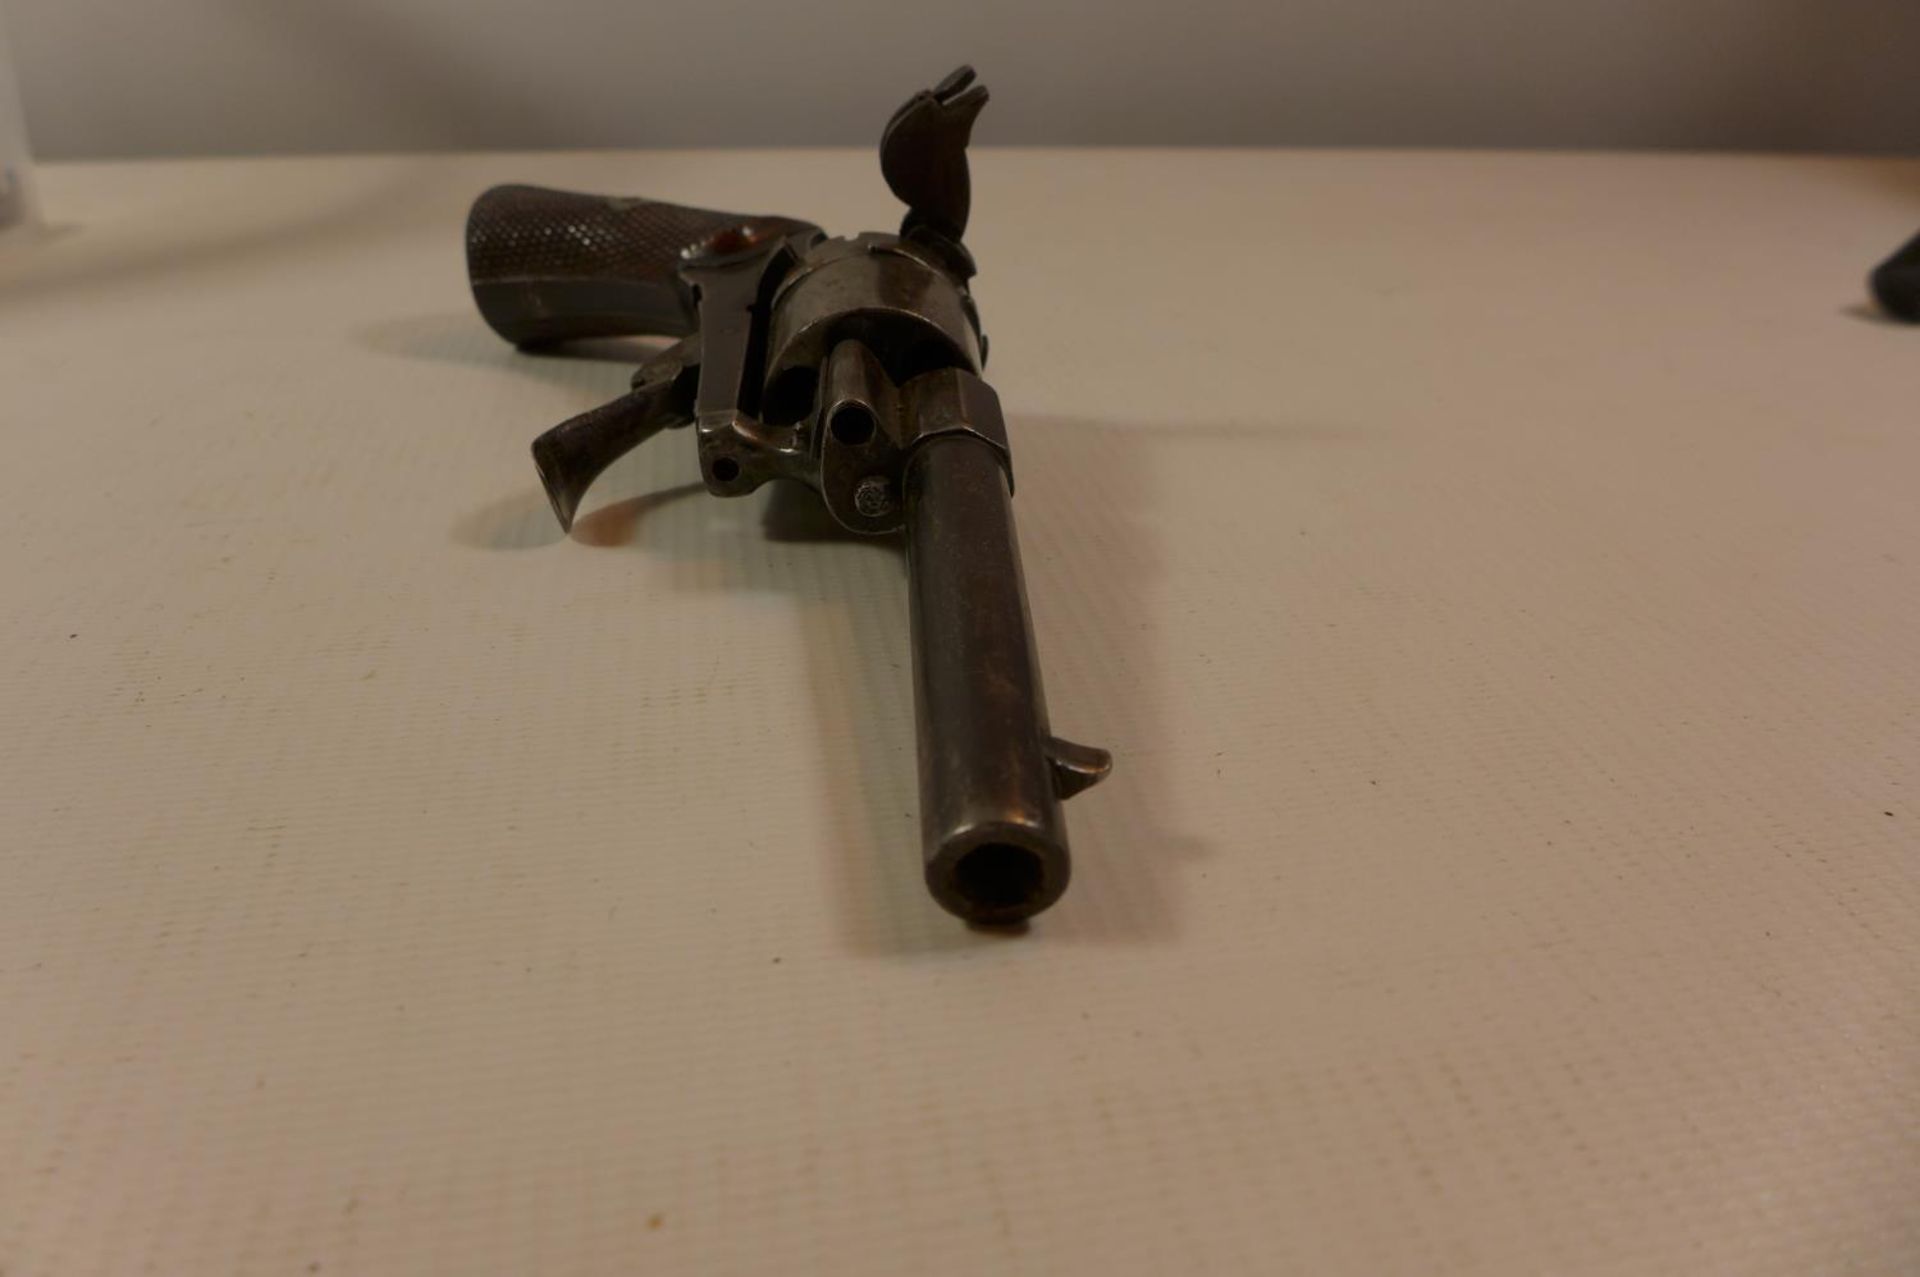 A SIX SHOT PIN FIRE REVOLVER WITH 8.5CM BARREL, A/F - Image 4 of 7